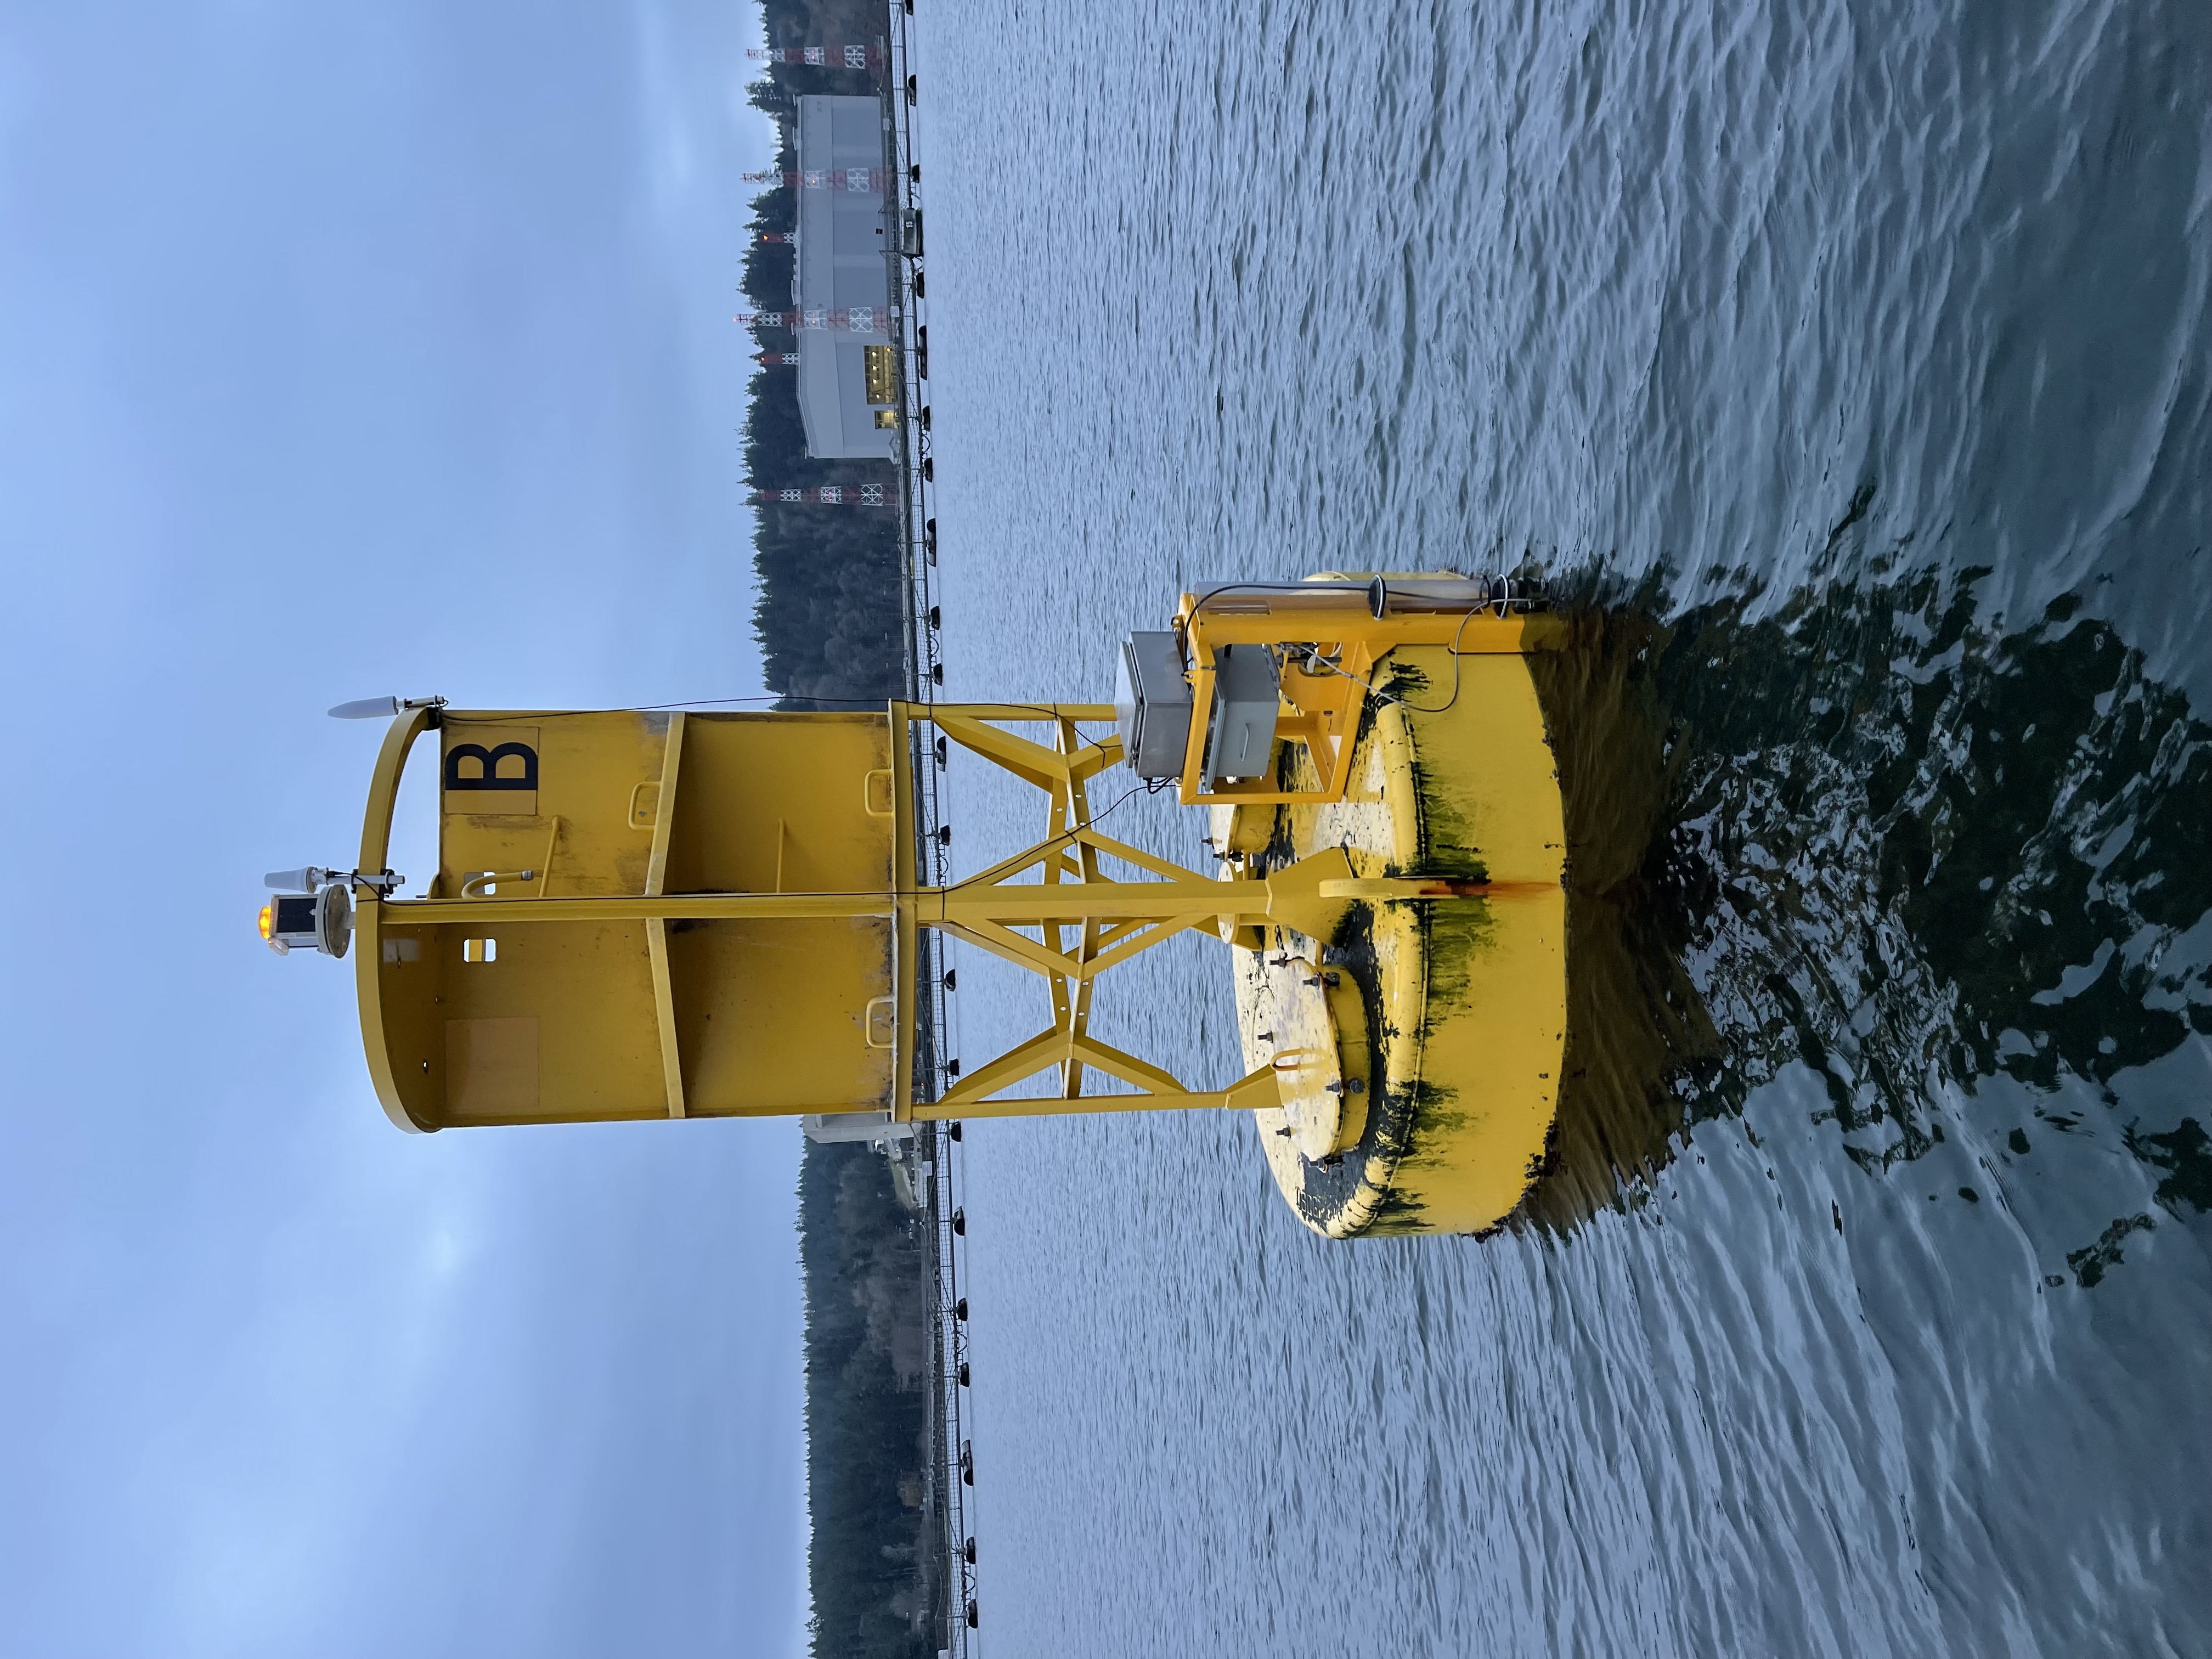 NOAA installed an important current meter on this navigation buoy in the Hood Canal near Bangor, WA. Data from this site and several others, will enhance maritime safety in the Rich Passage transit lanes, Hood Canal and, near the Naval Base Kitsap and Bremerton Dry Docks.